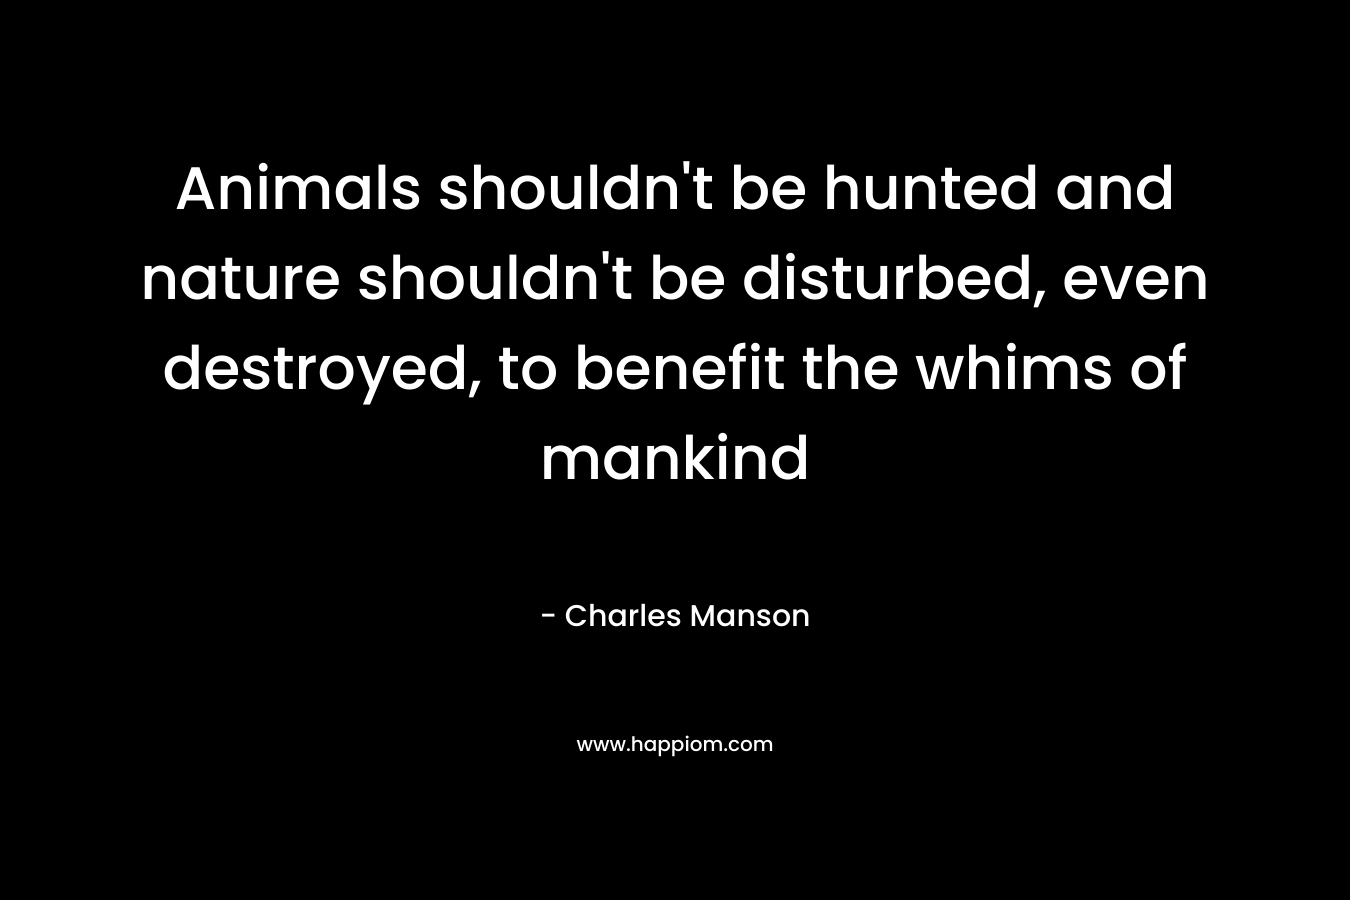 Animals shouldn’t be hunted and nature shouldn’t be disturbed, even destroyed, to benefit the whims of mankind – Charles Manson